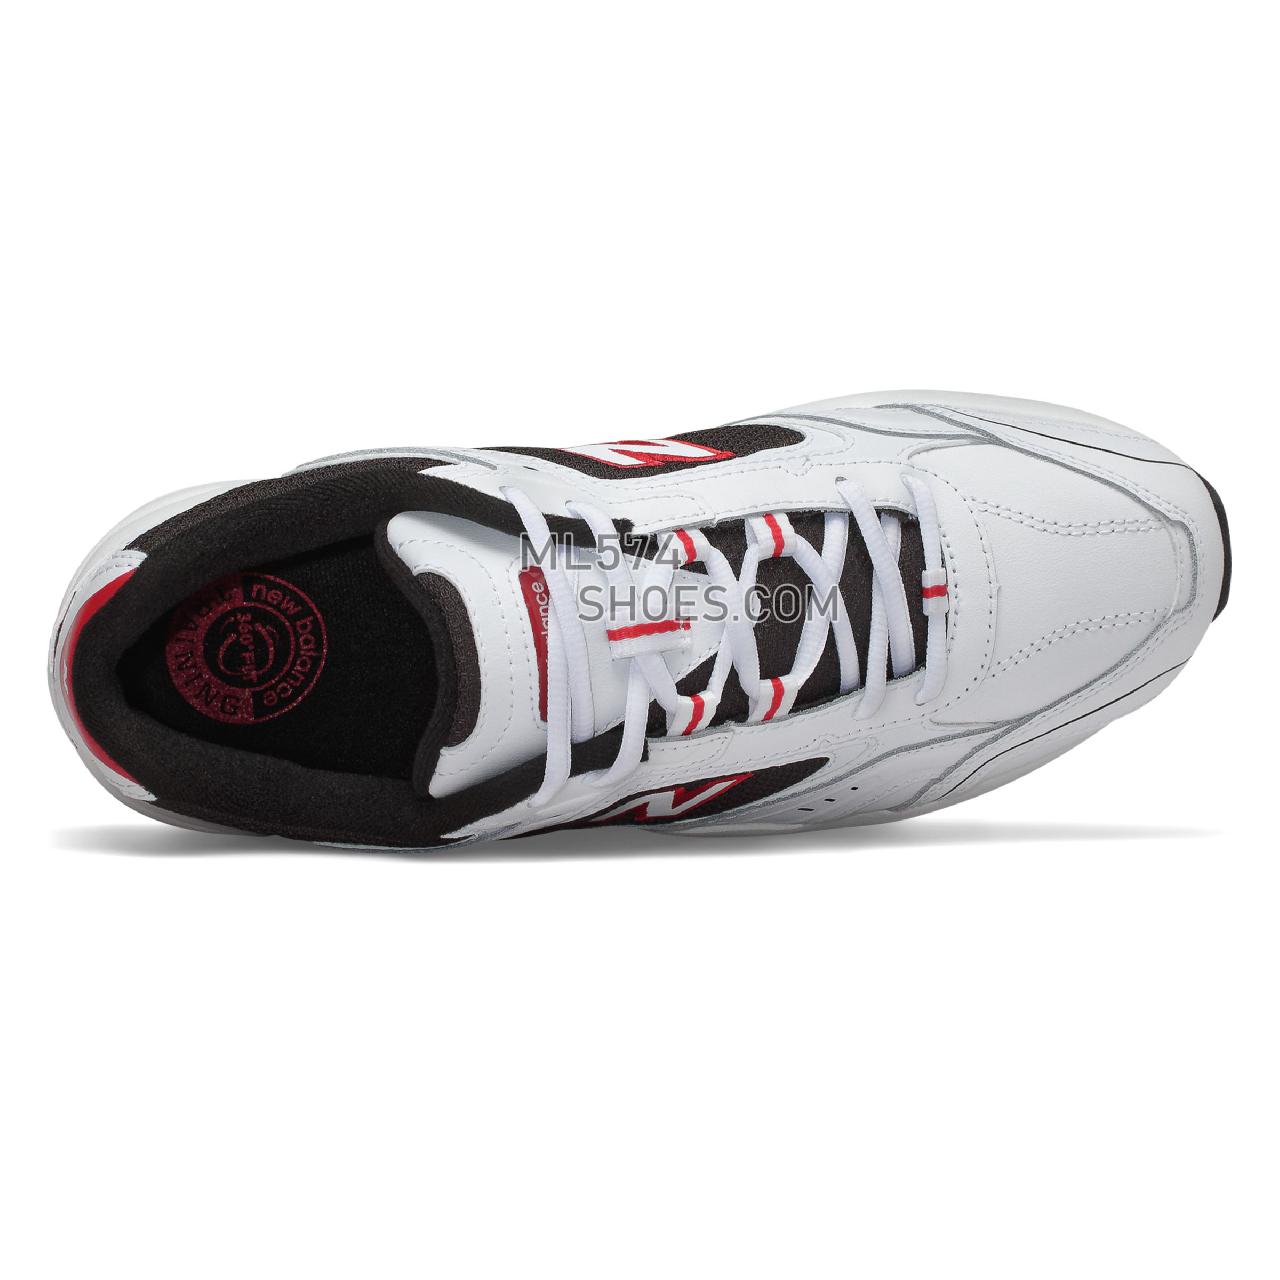 New Balance MX452V1 - Unisex Men's Women's Classic Sneakers - White with Black and Team Red - MX452SD